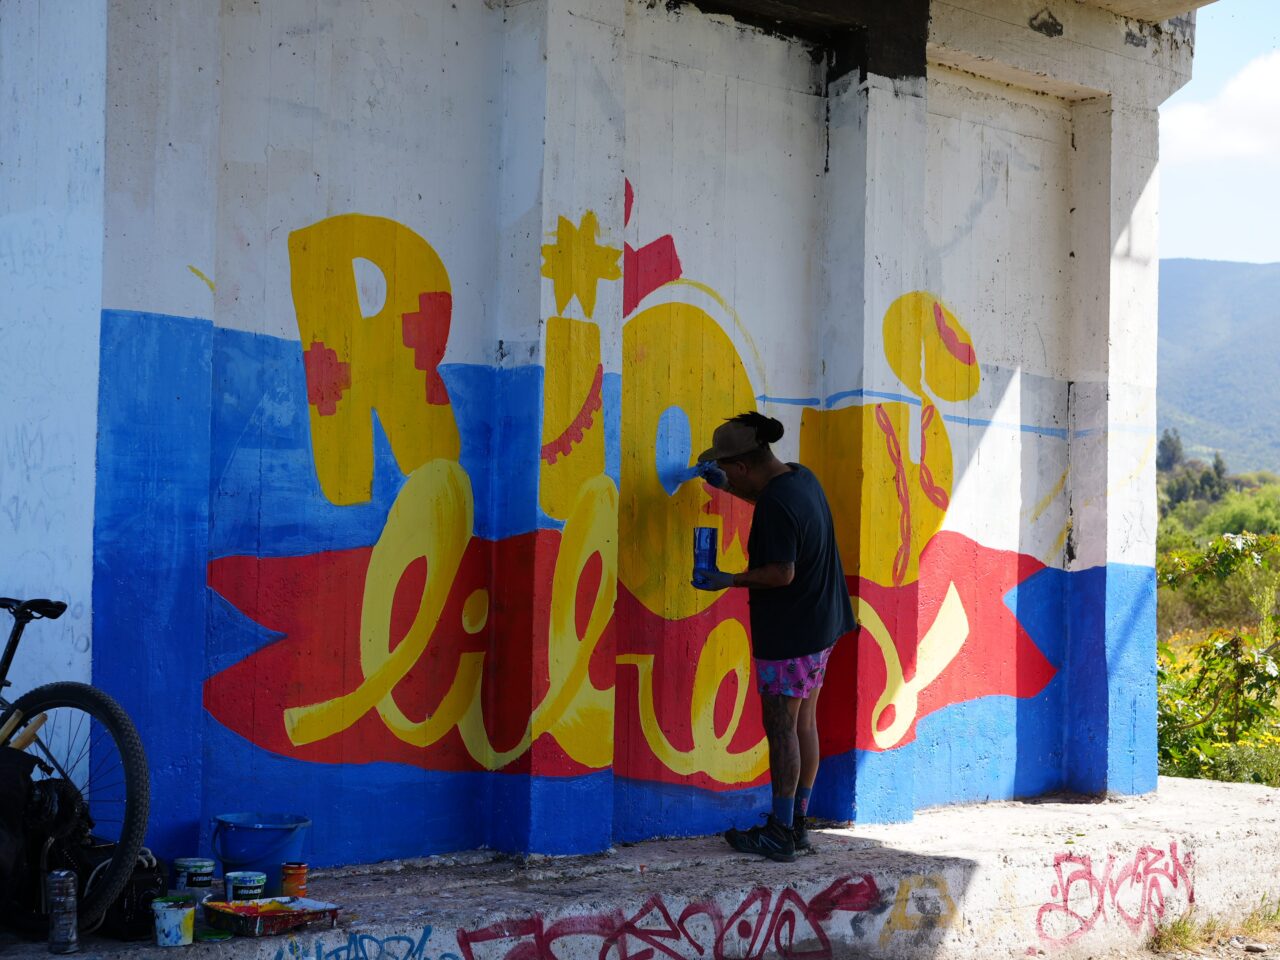 A man painting a mural